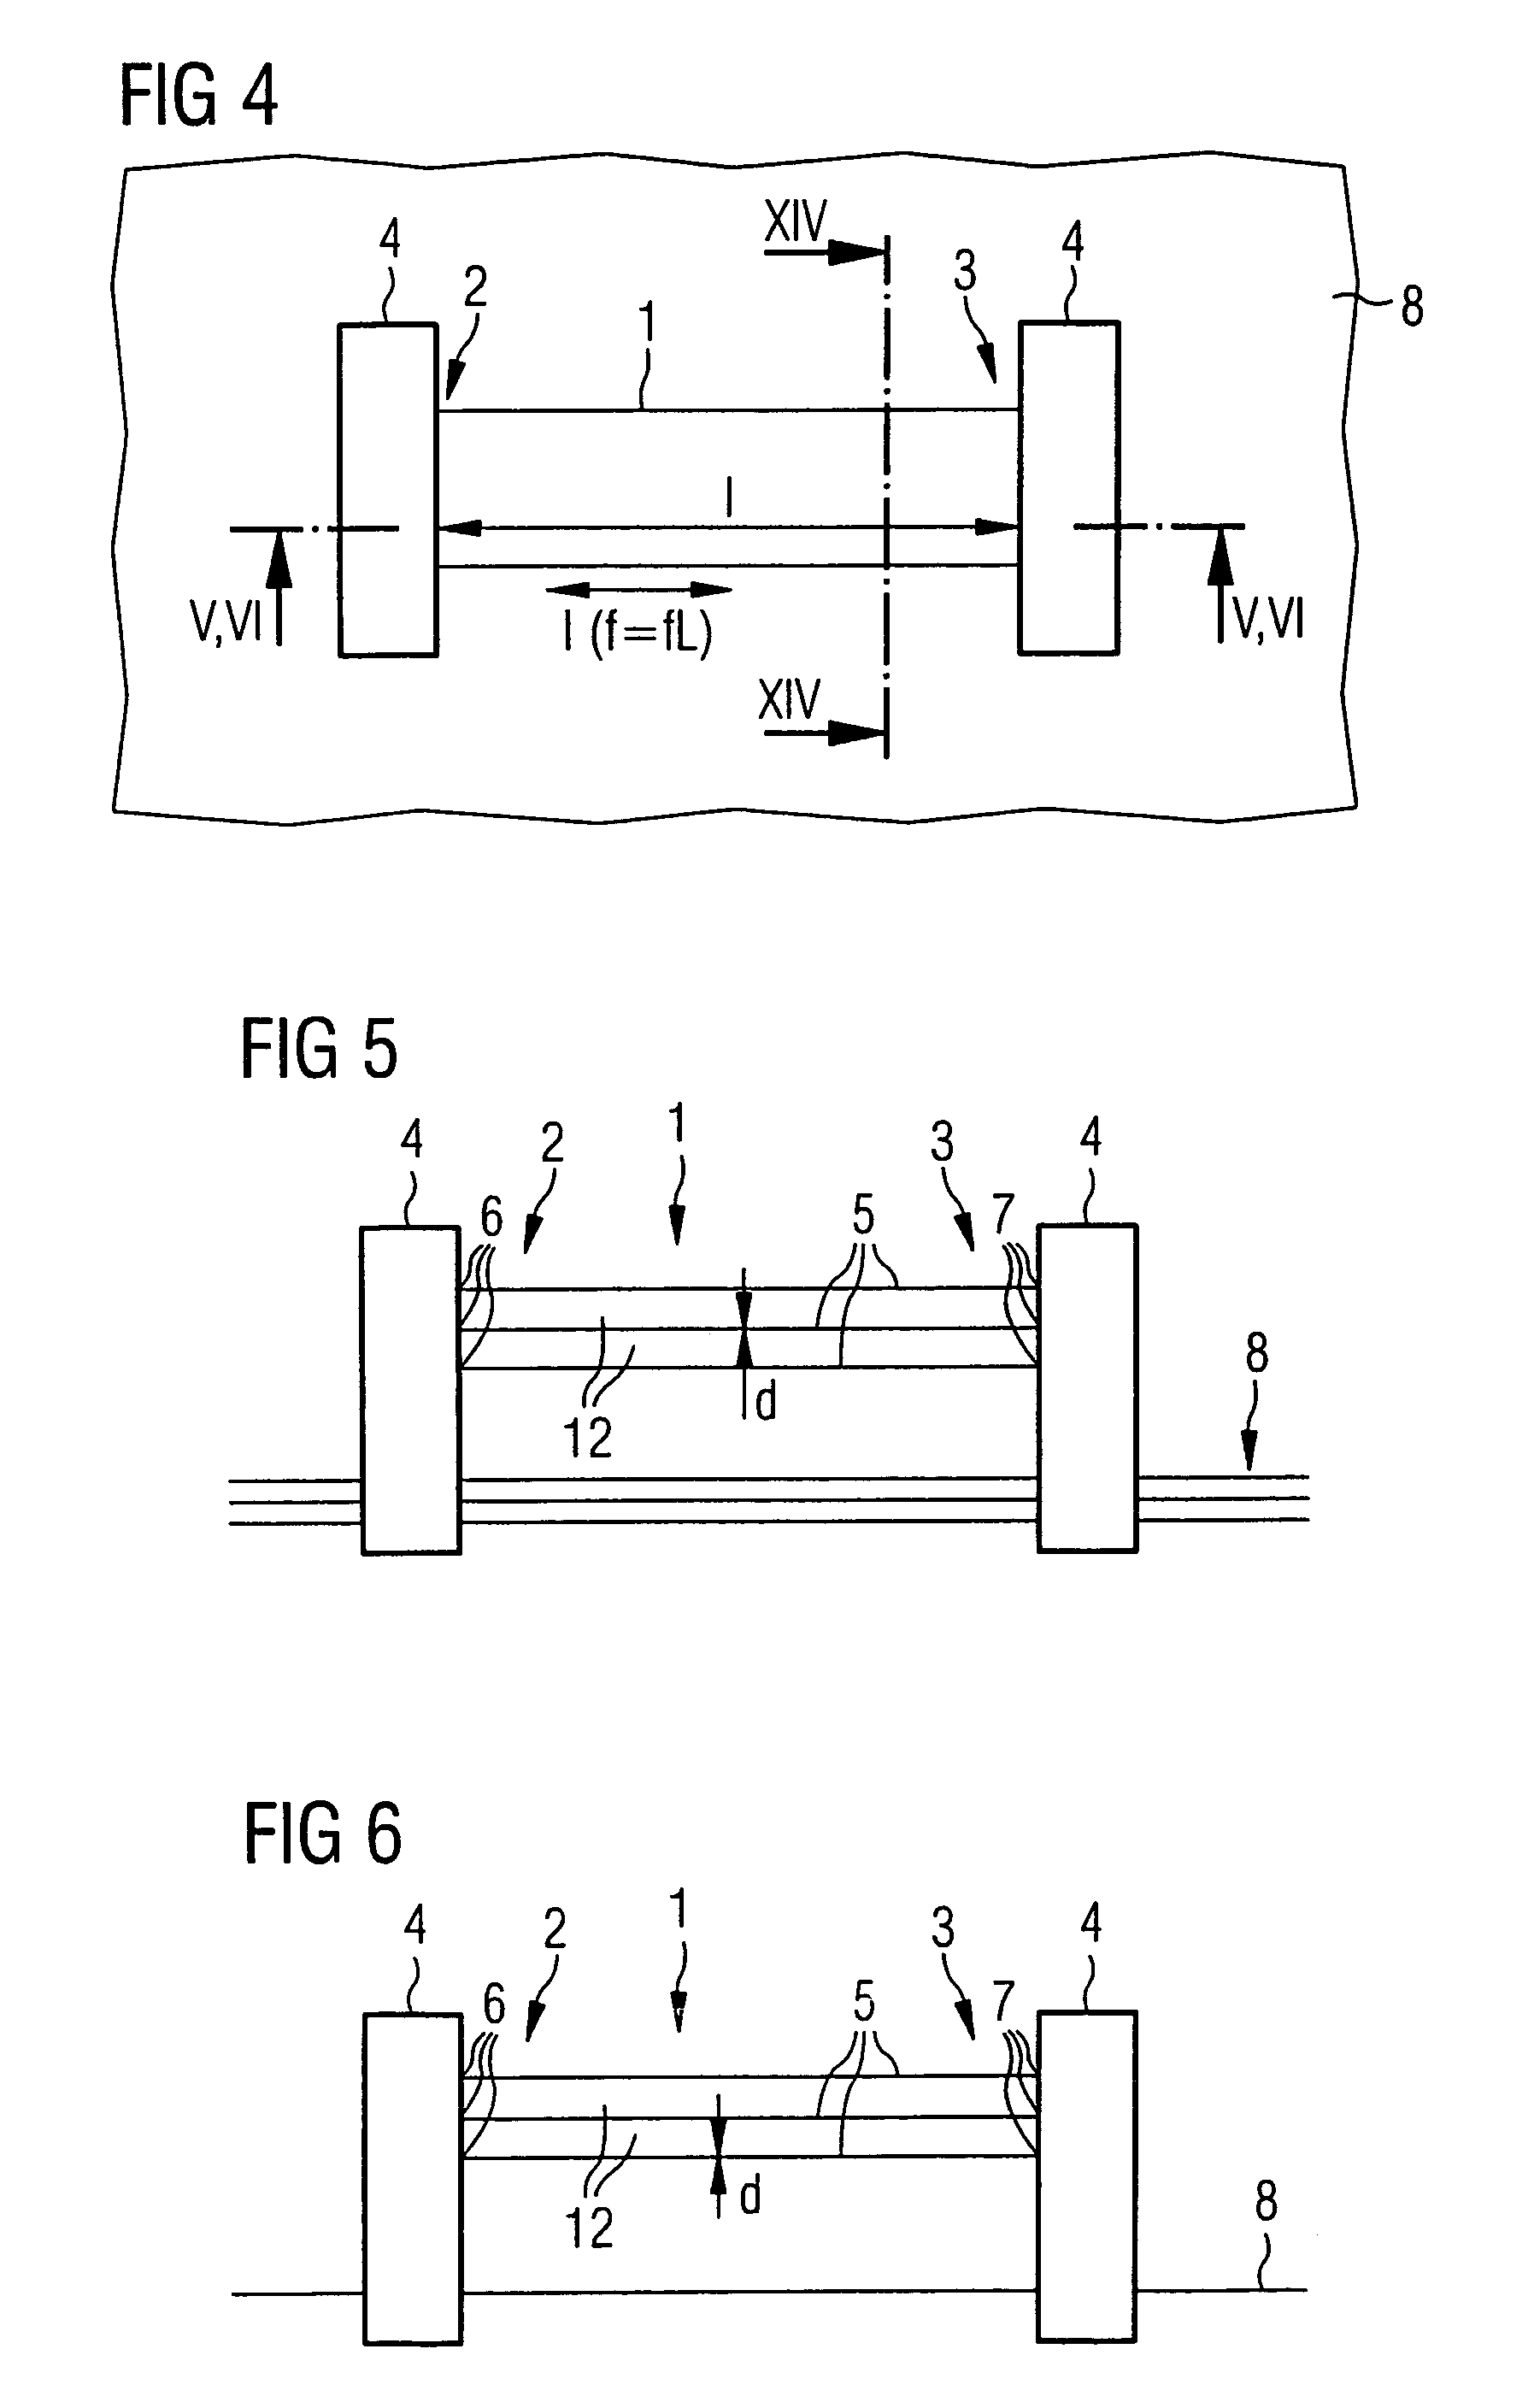 Multi-layer resonator for magnetic resonance applications with circuitry allowing equal magnitude current during active operation